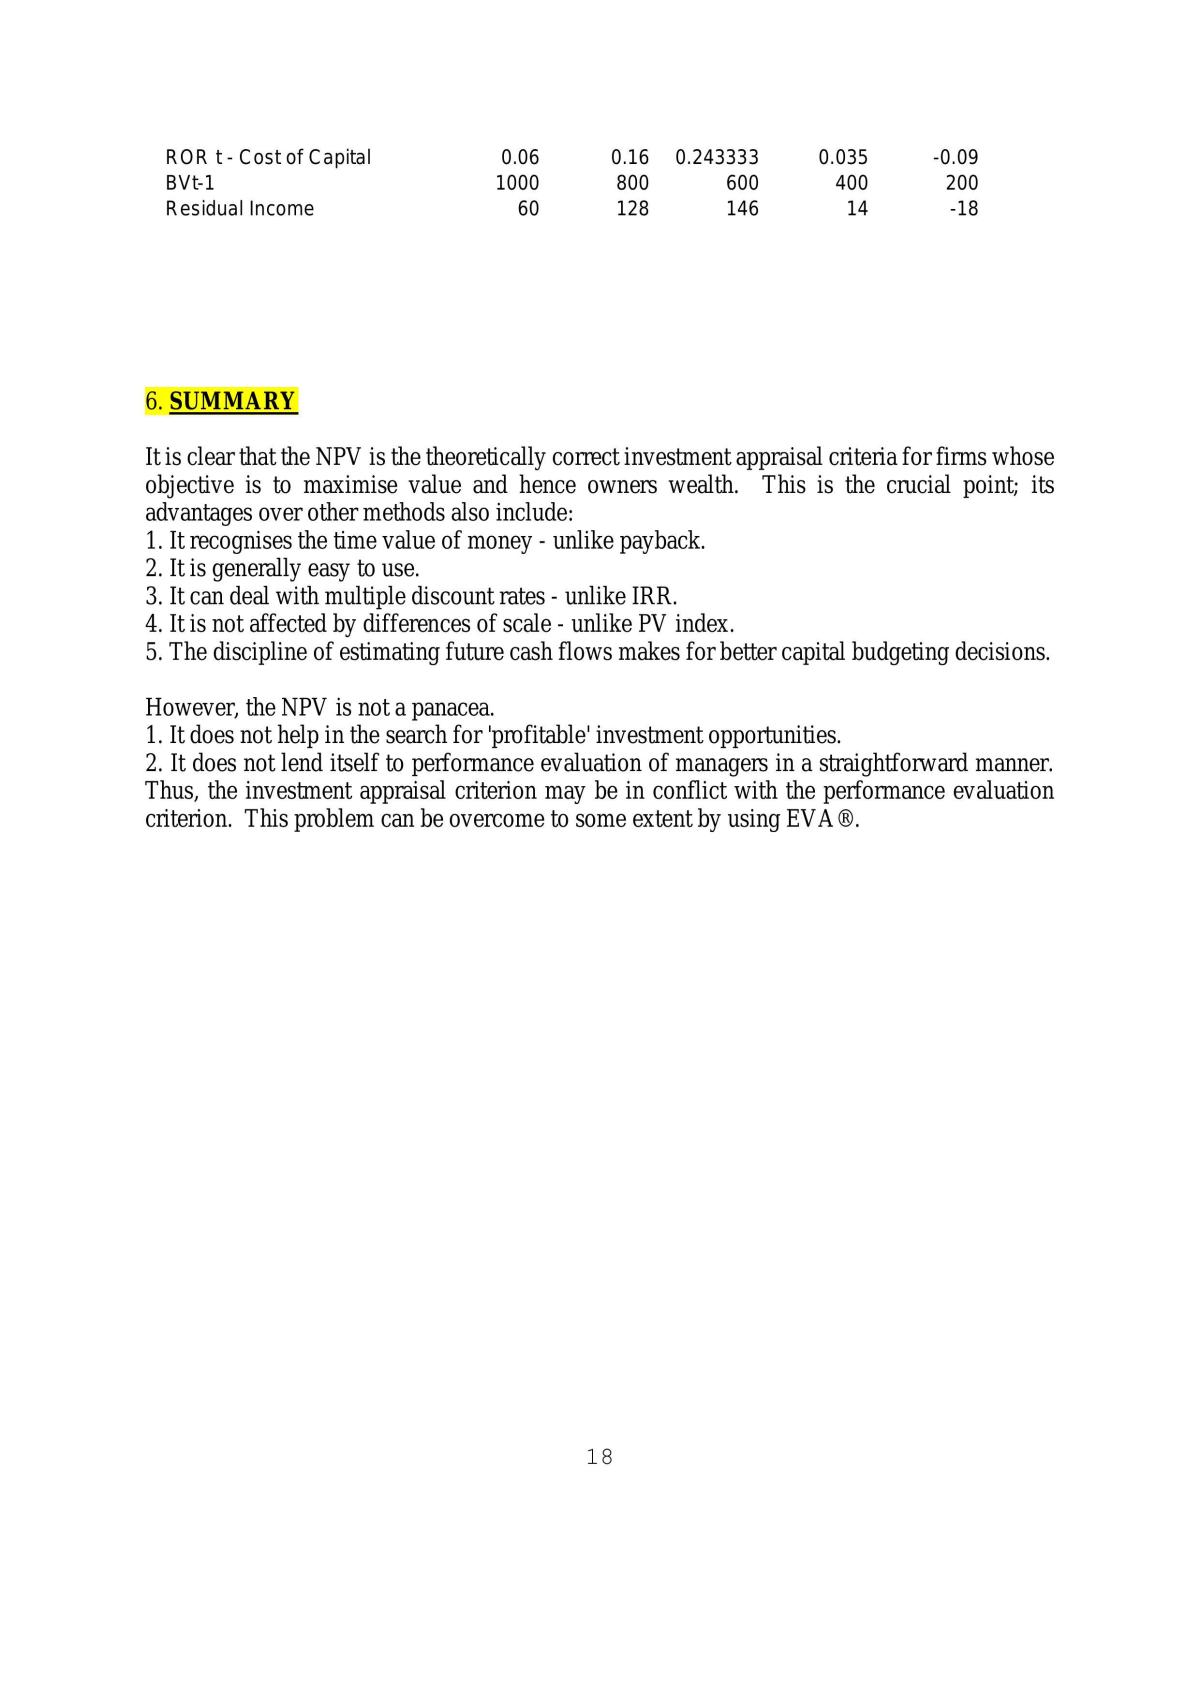 Complete Notes for Investment Appraisal Module - The Investment Decision - Page 18